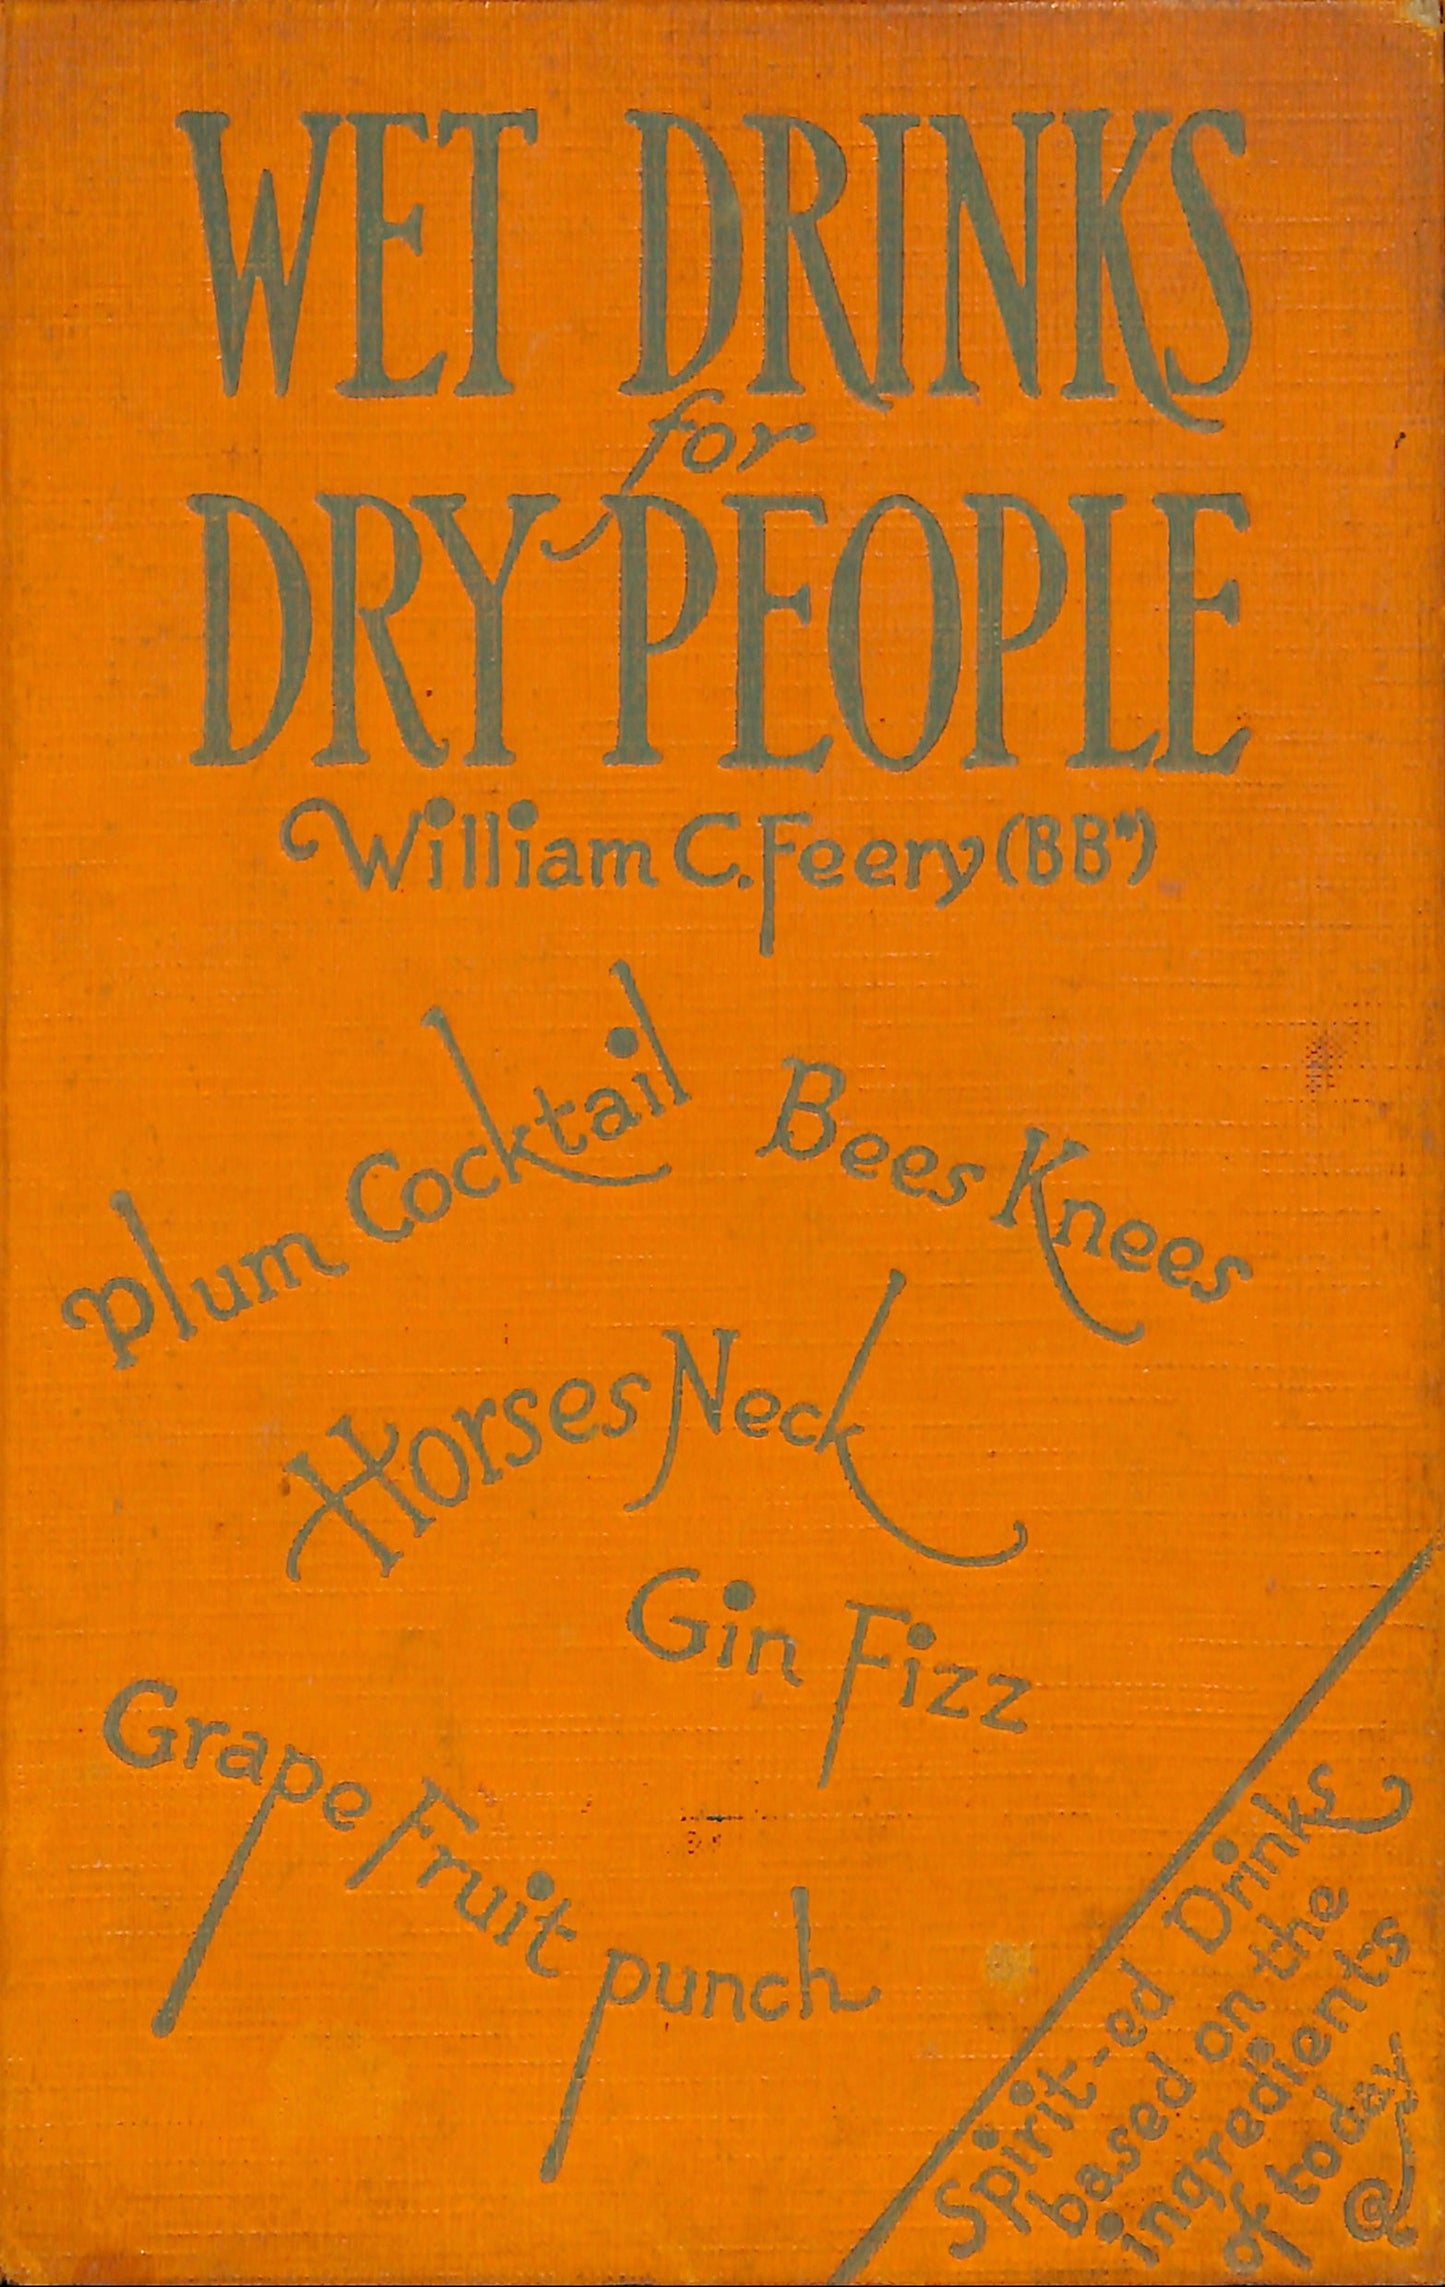 Wet Drinks for Dry People Cocktail book cover (1932) | Man cave bar prints Posters, Prints, & Visual Artwork The Trumpet Shop   